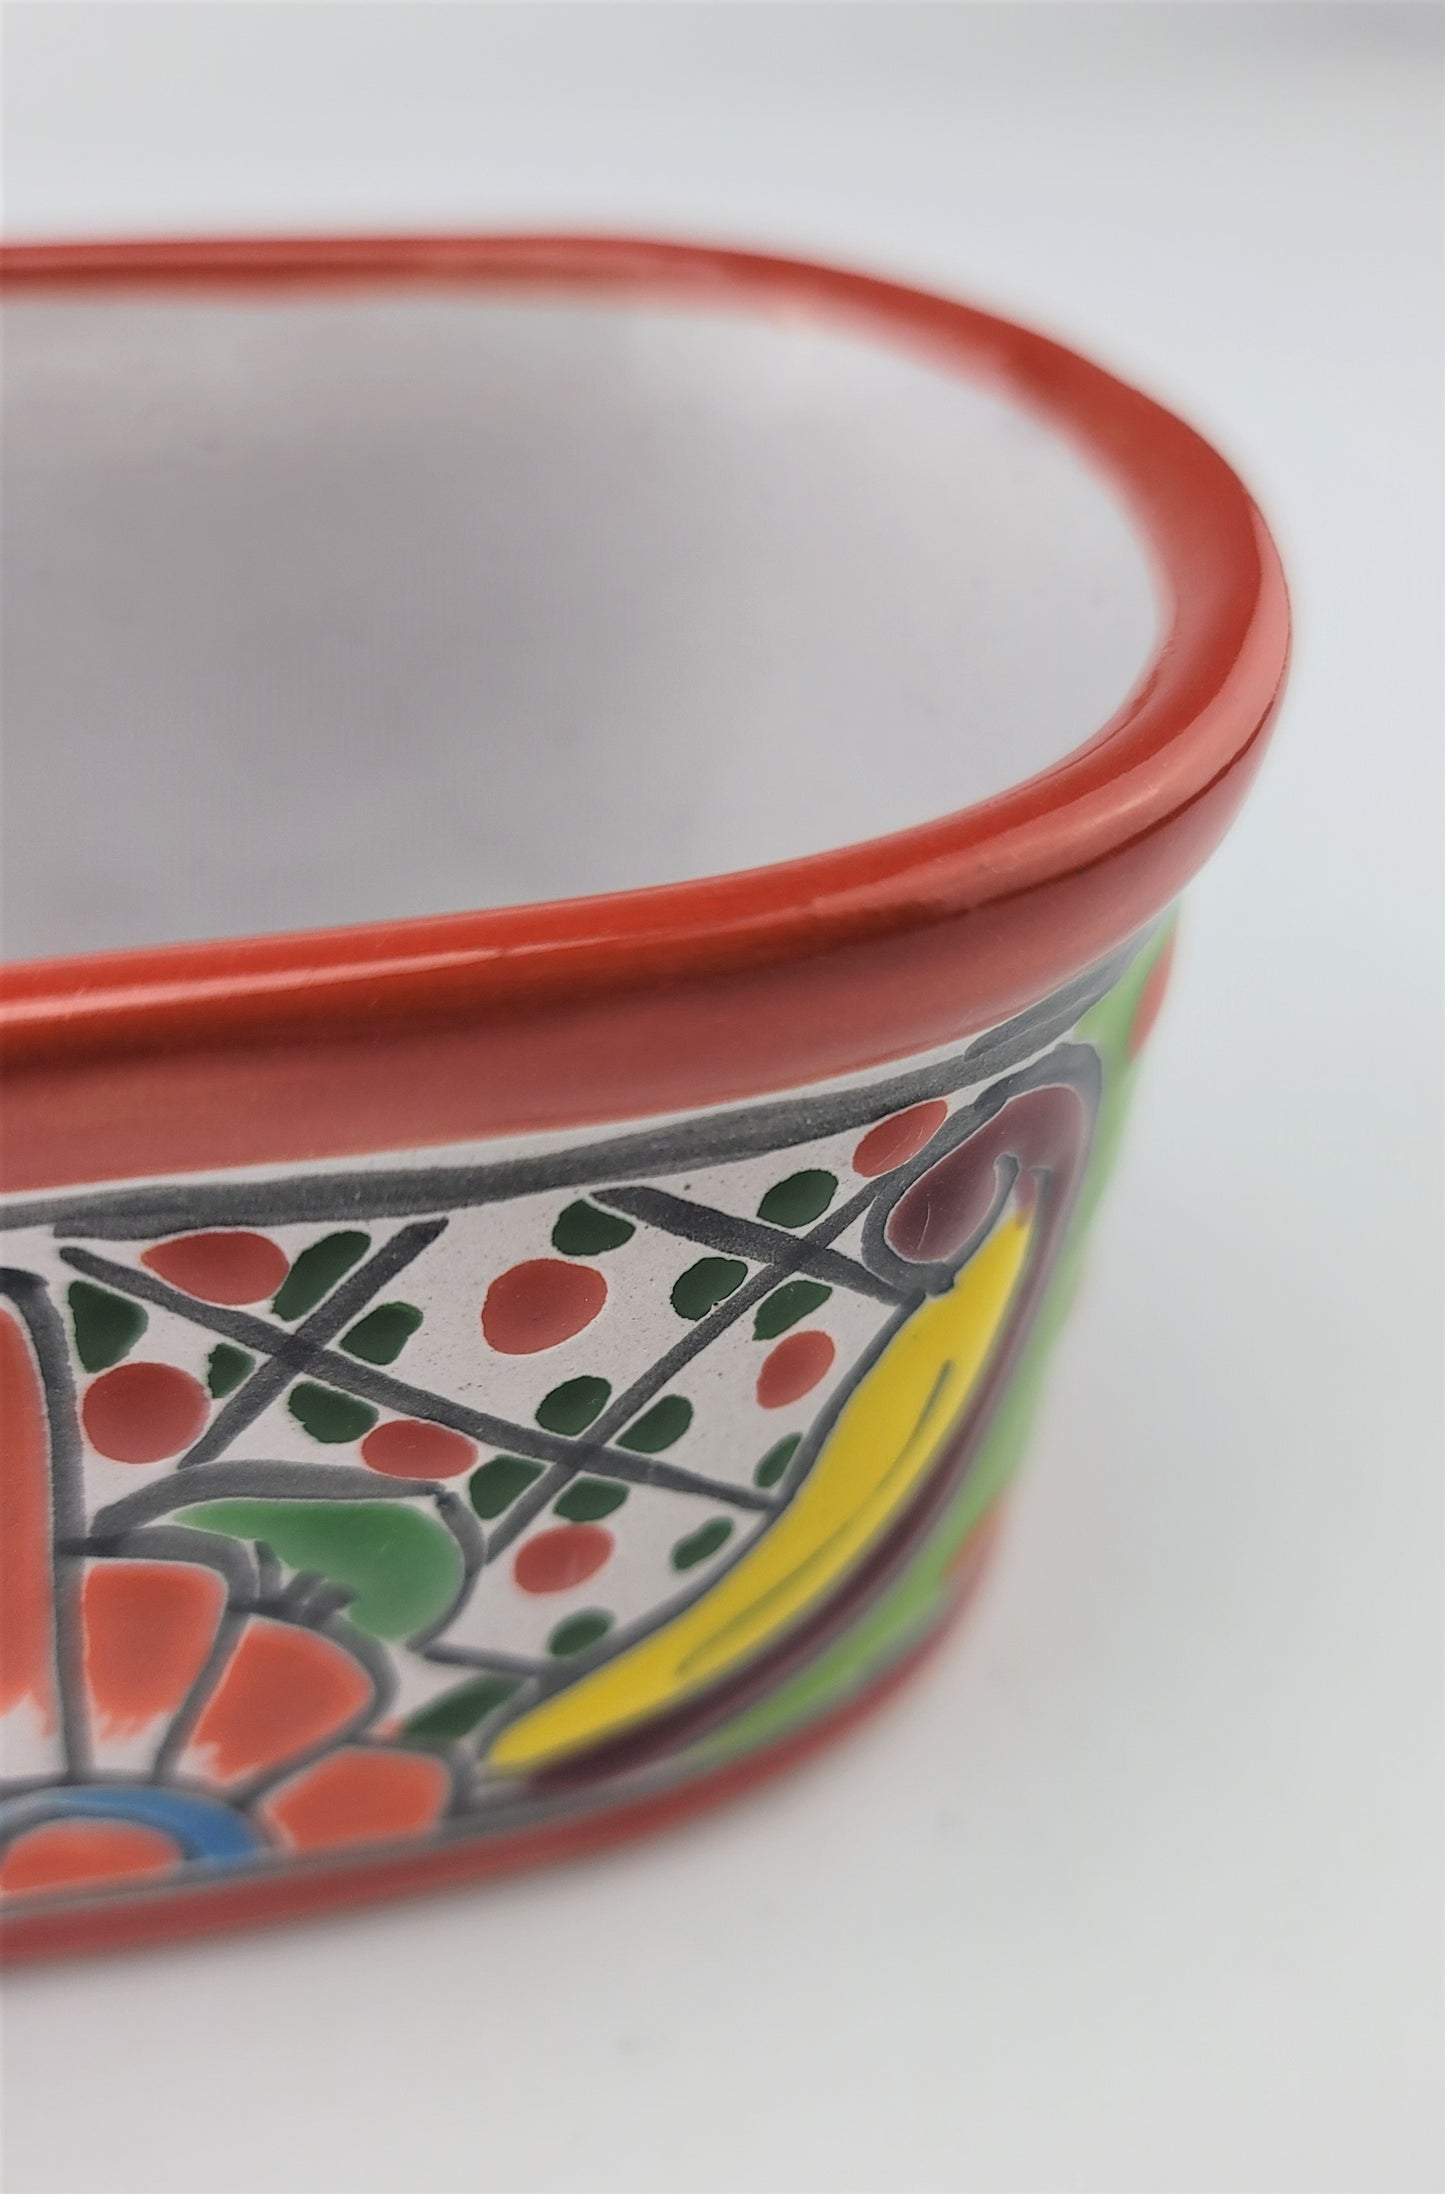 Mexican Pottery Hand-Painted Floral Design Mexico Folk Art